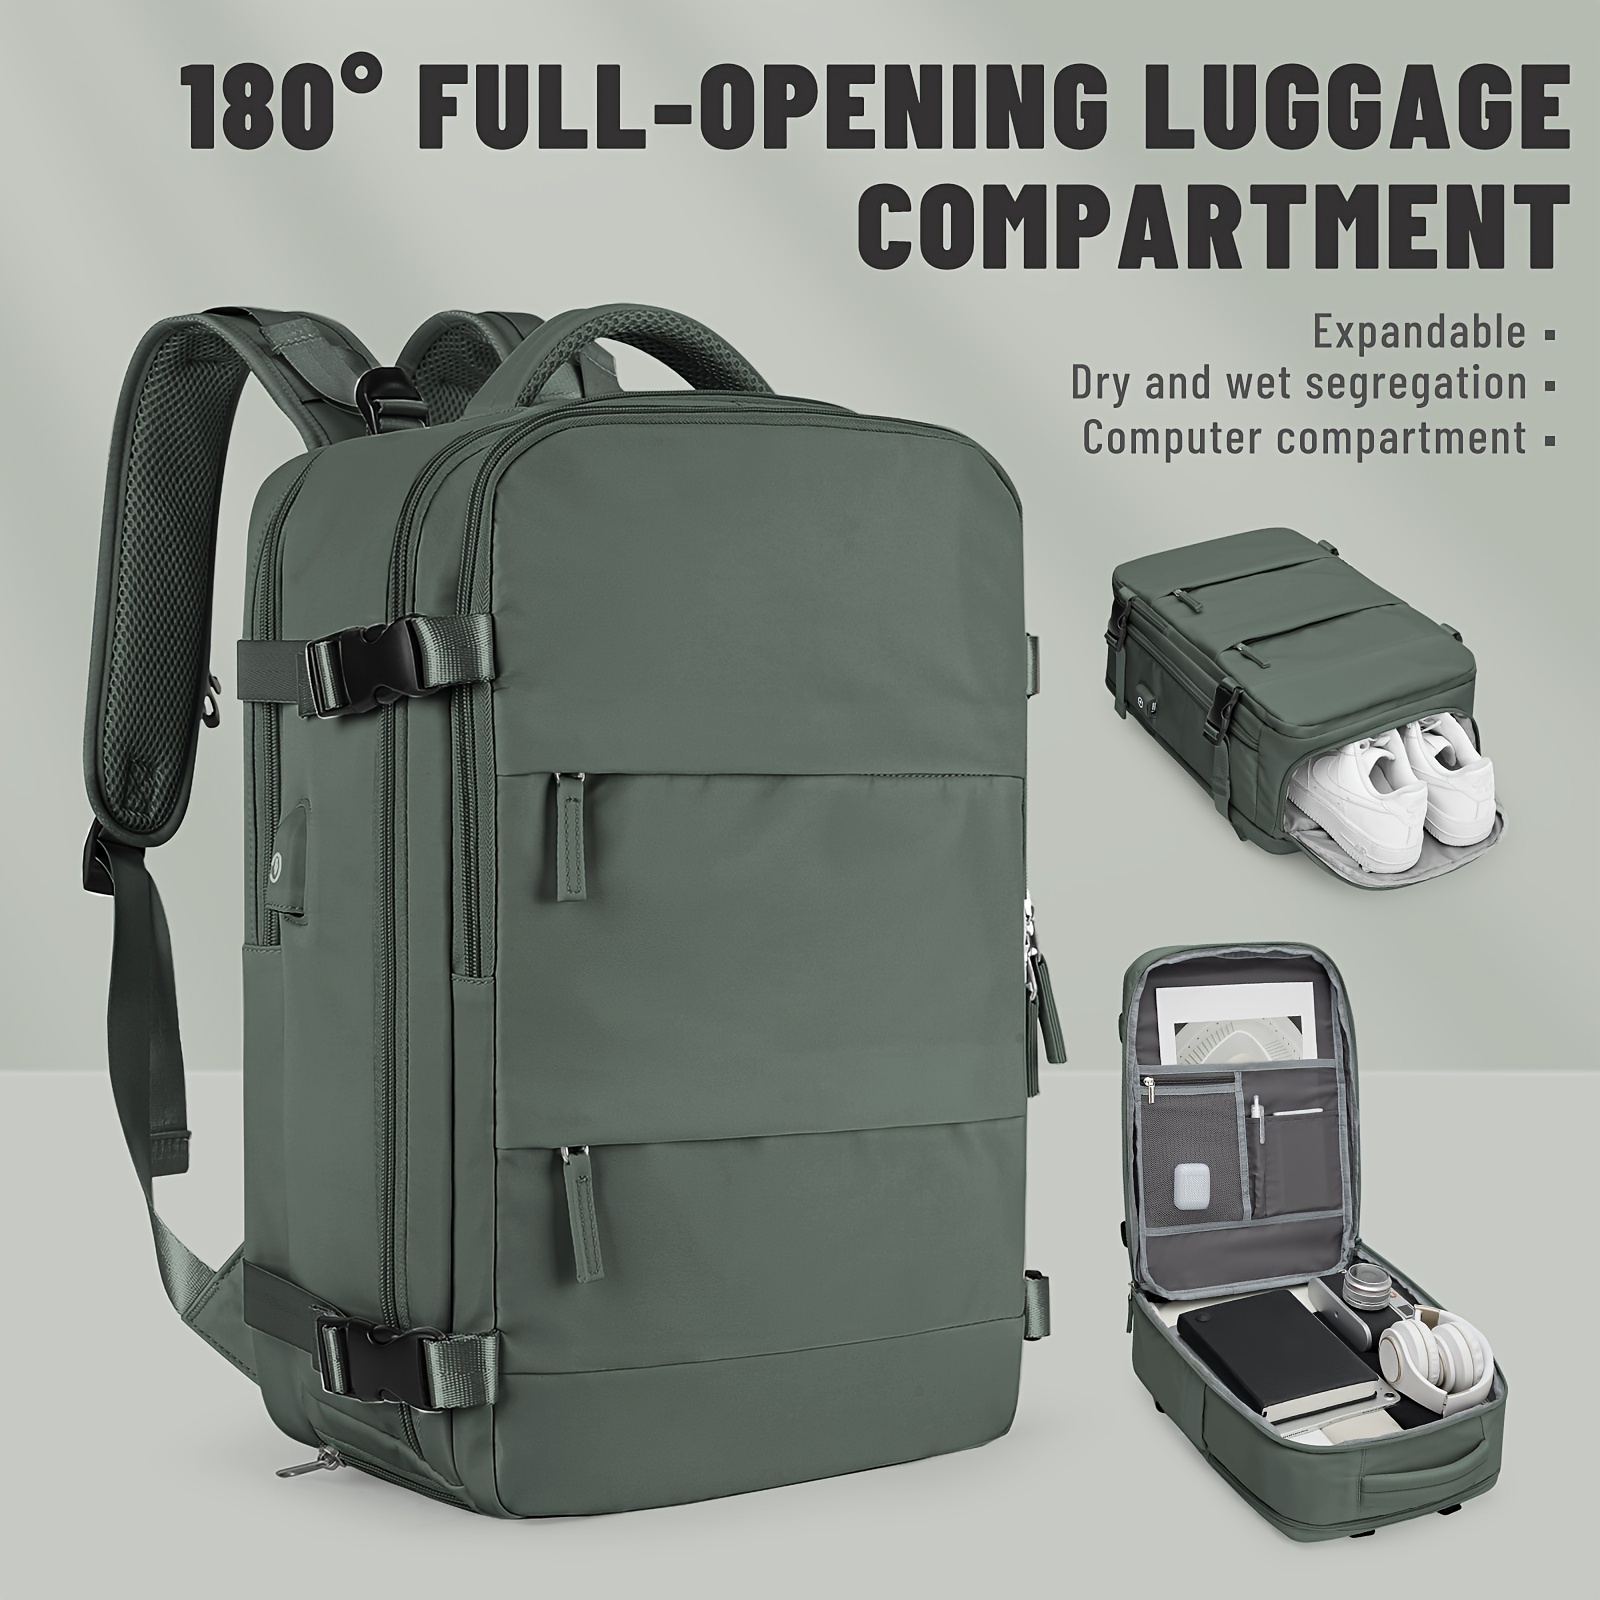 

Expandable Travel Backpack, 35l Capacity, Nylon, 180° Full-opening Luggage Compartment, Separate Shoe Pocket, Laptop Compartment, Multi-pocket, Lightweight, Breathable